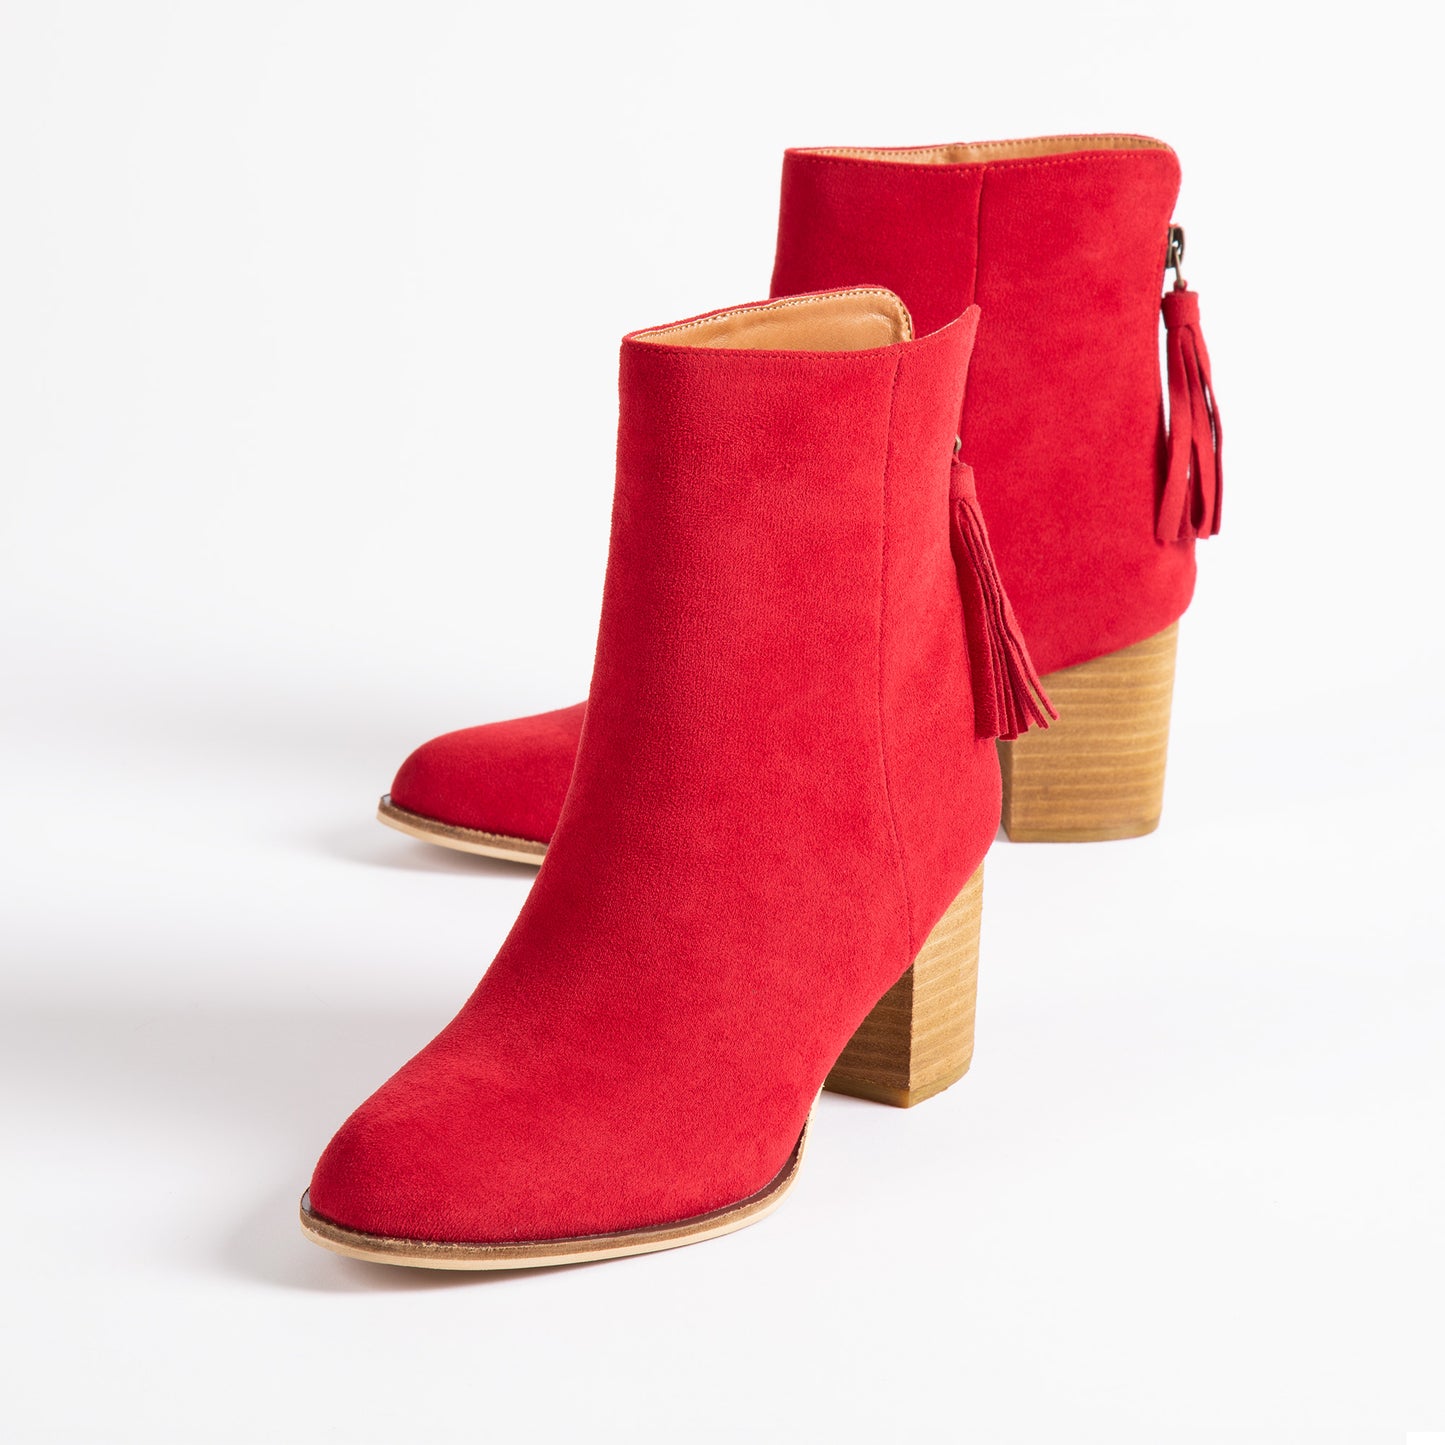 Corkys Boujee Red Mid-Calf Boots